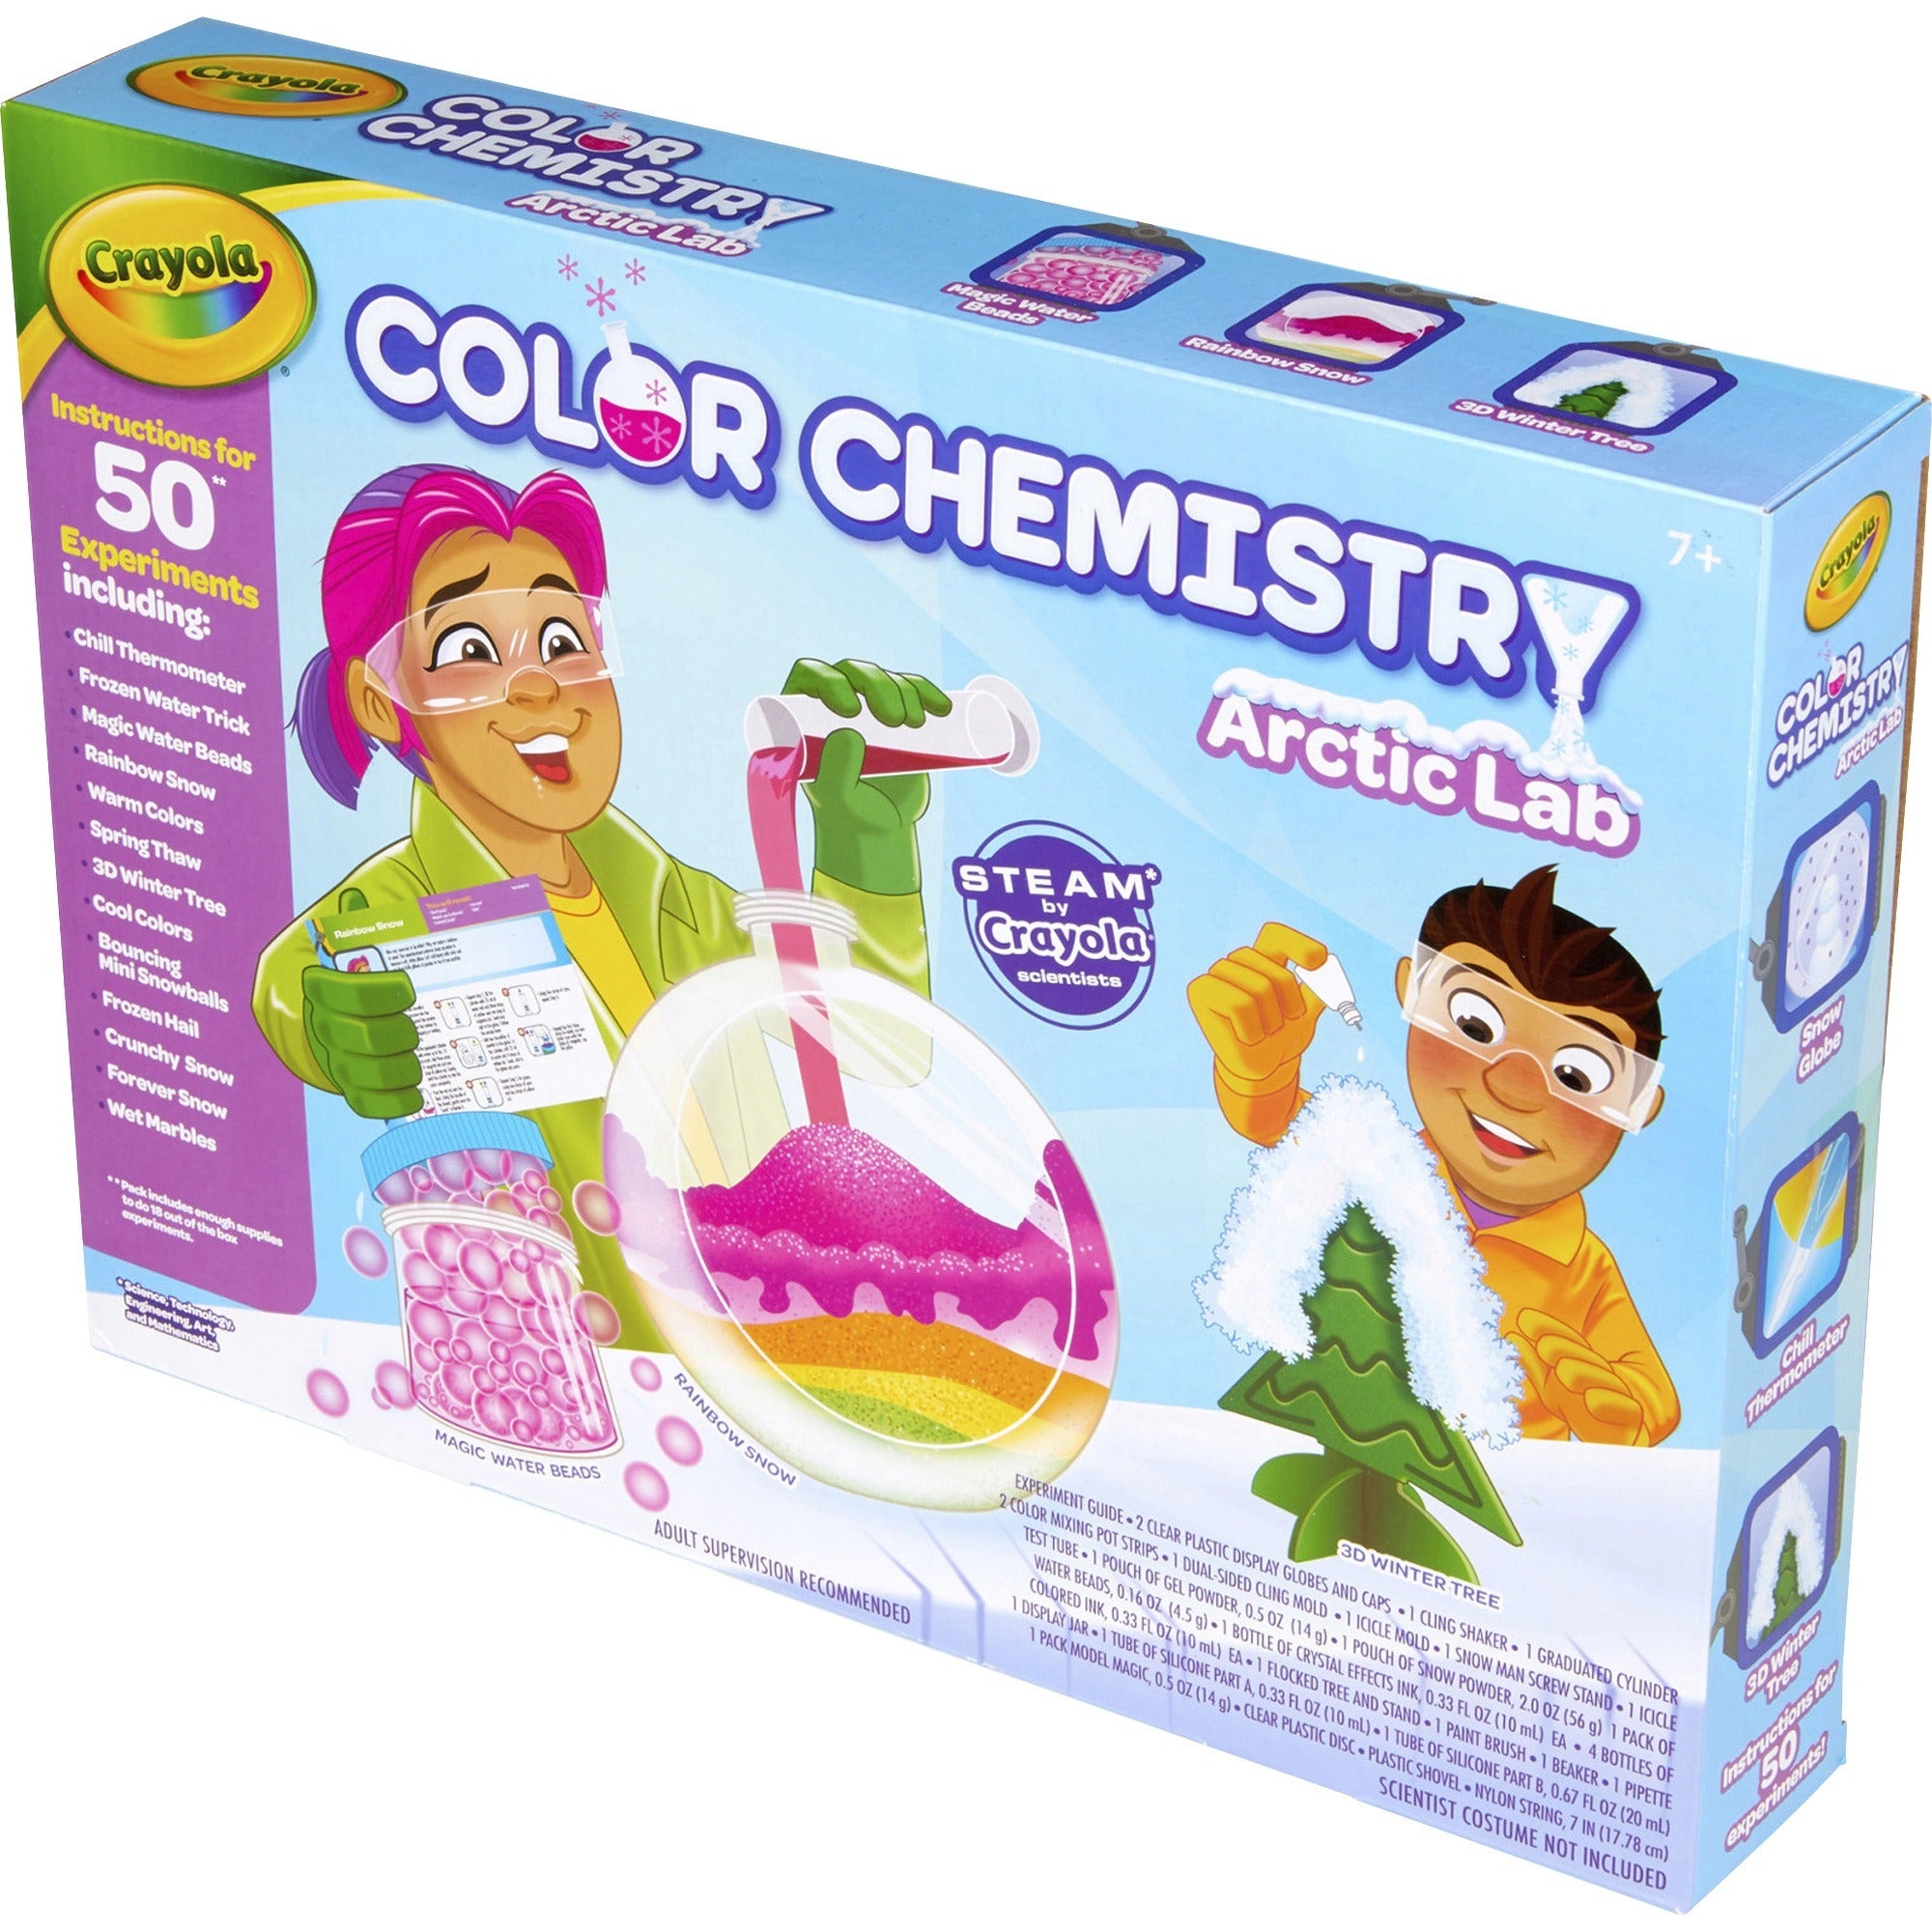 crayola-color-chemistry-arctic-lab-set-skill-learning-science-chemistry-7-year-&-up-multi_cyo747296 - 4